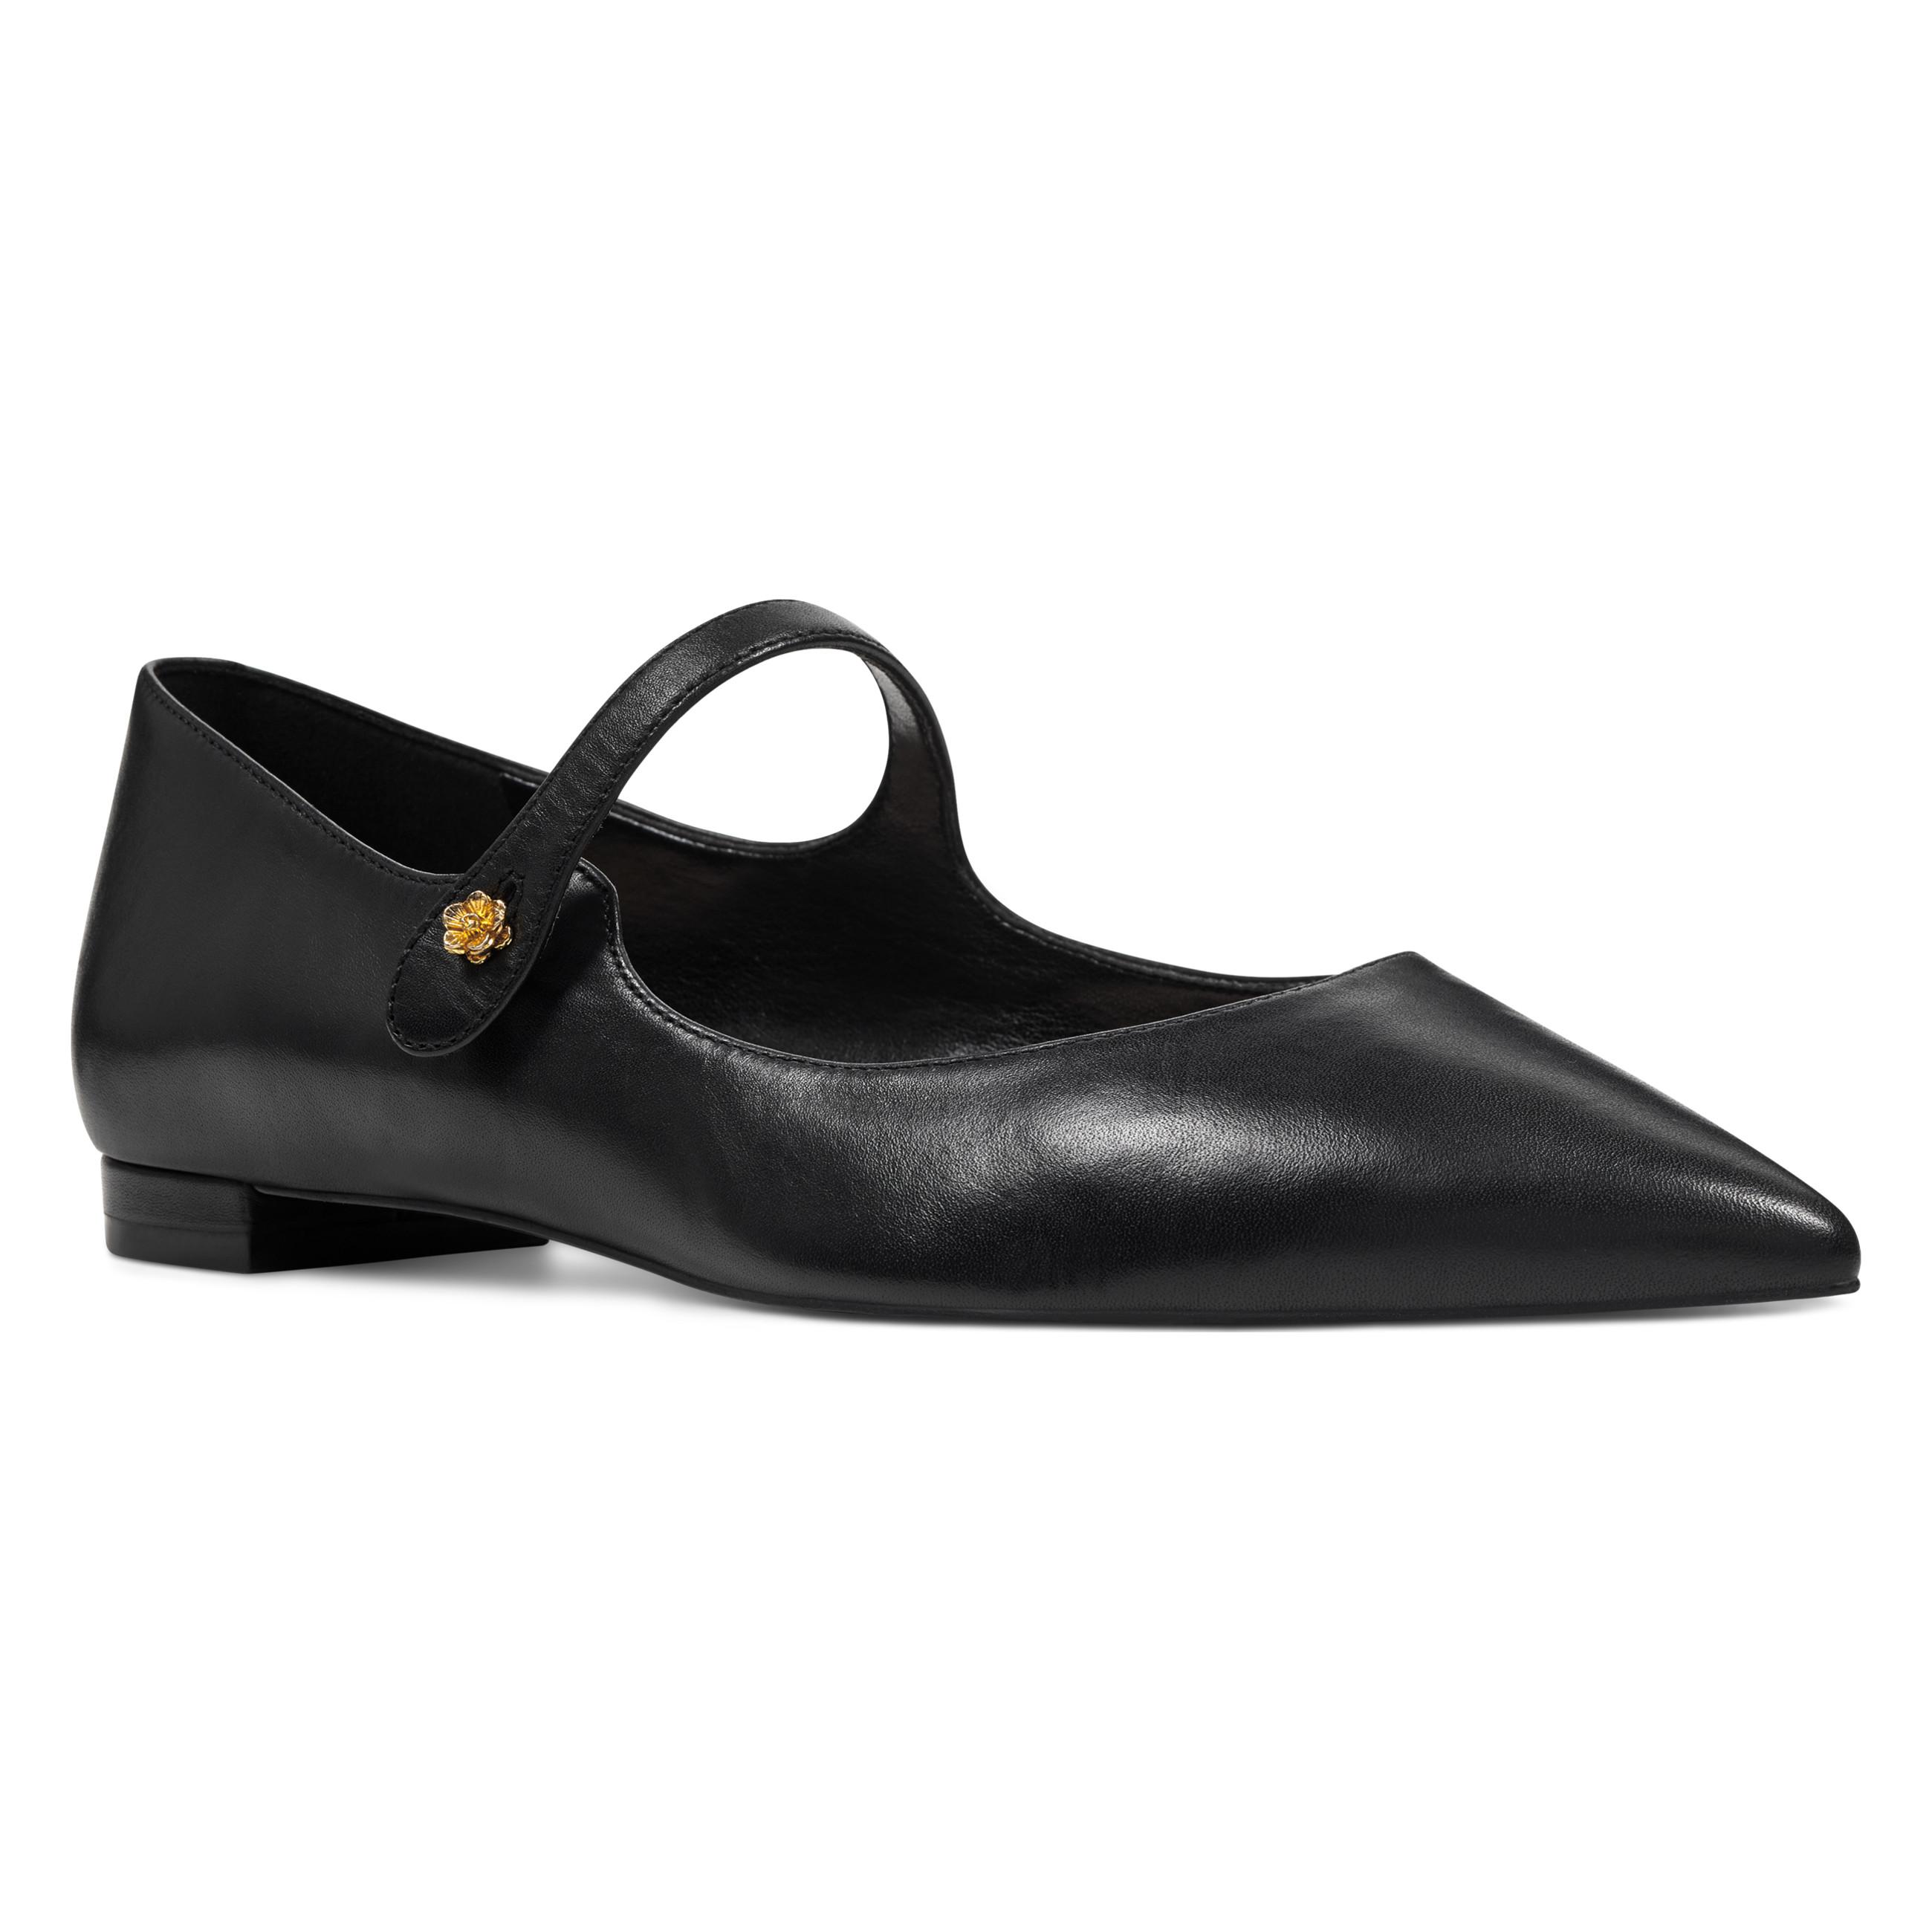 Nine West Ashby Mary Jane Flats in Black Leather (Black) - Lyst